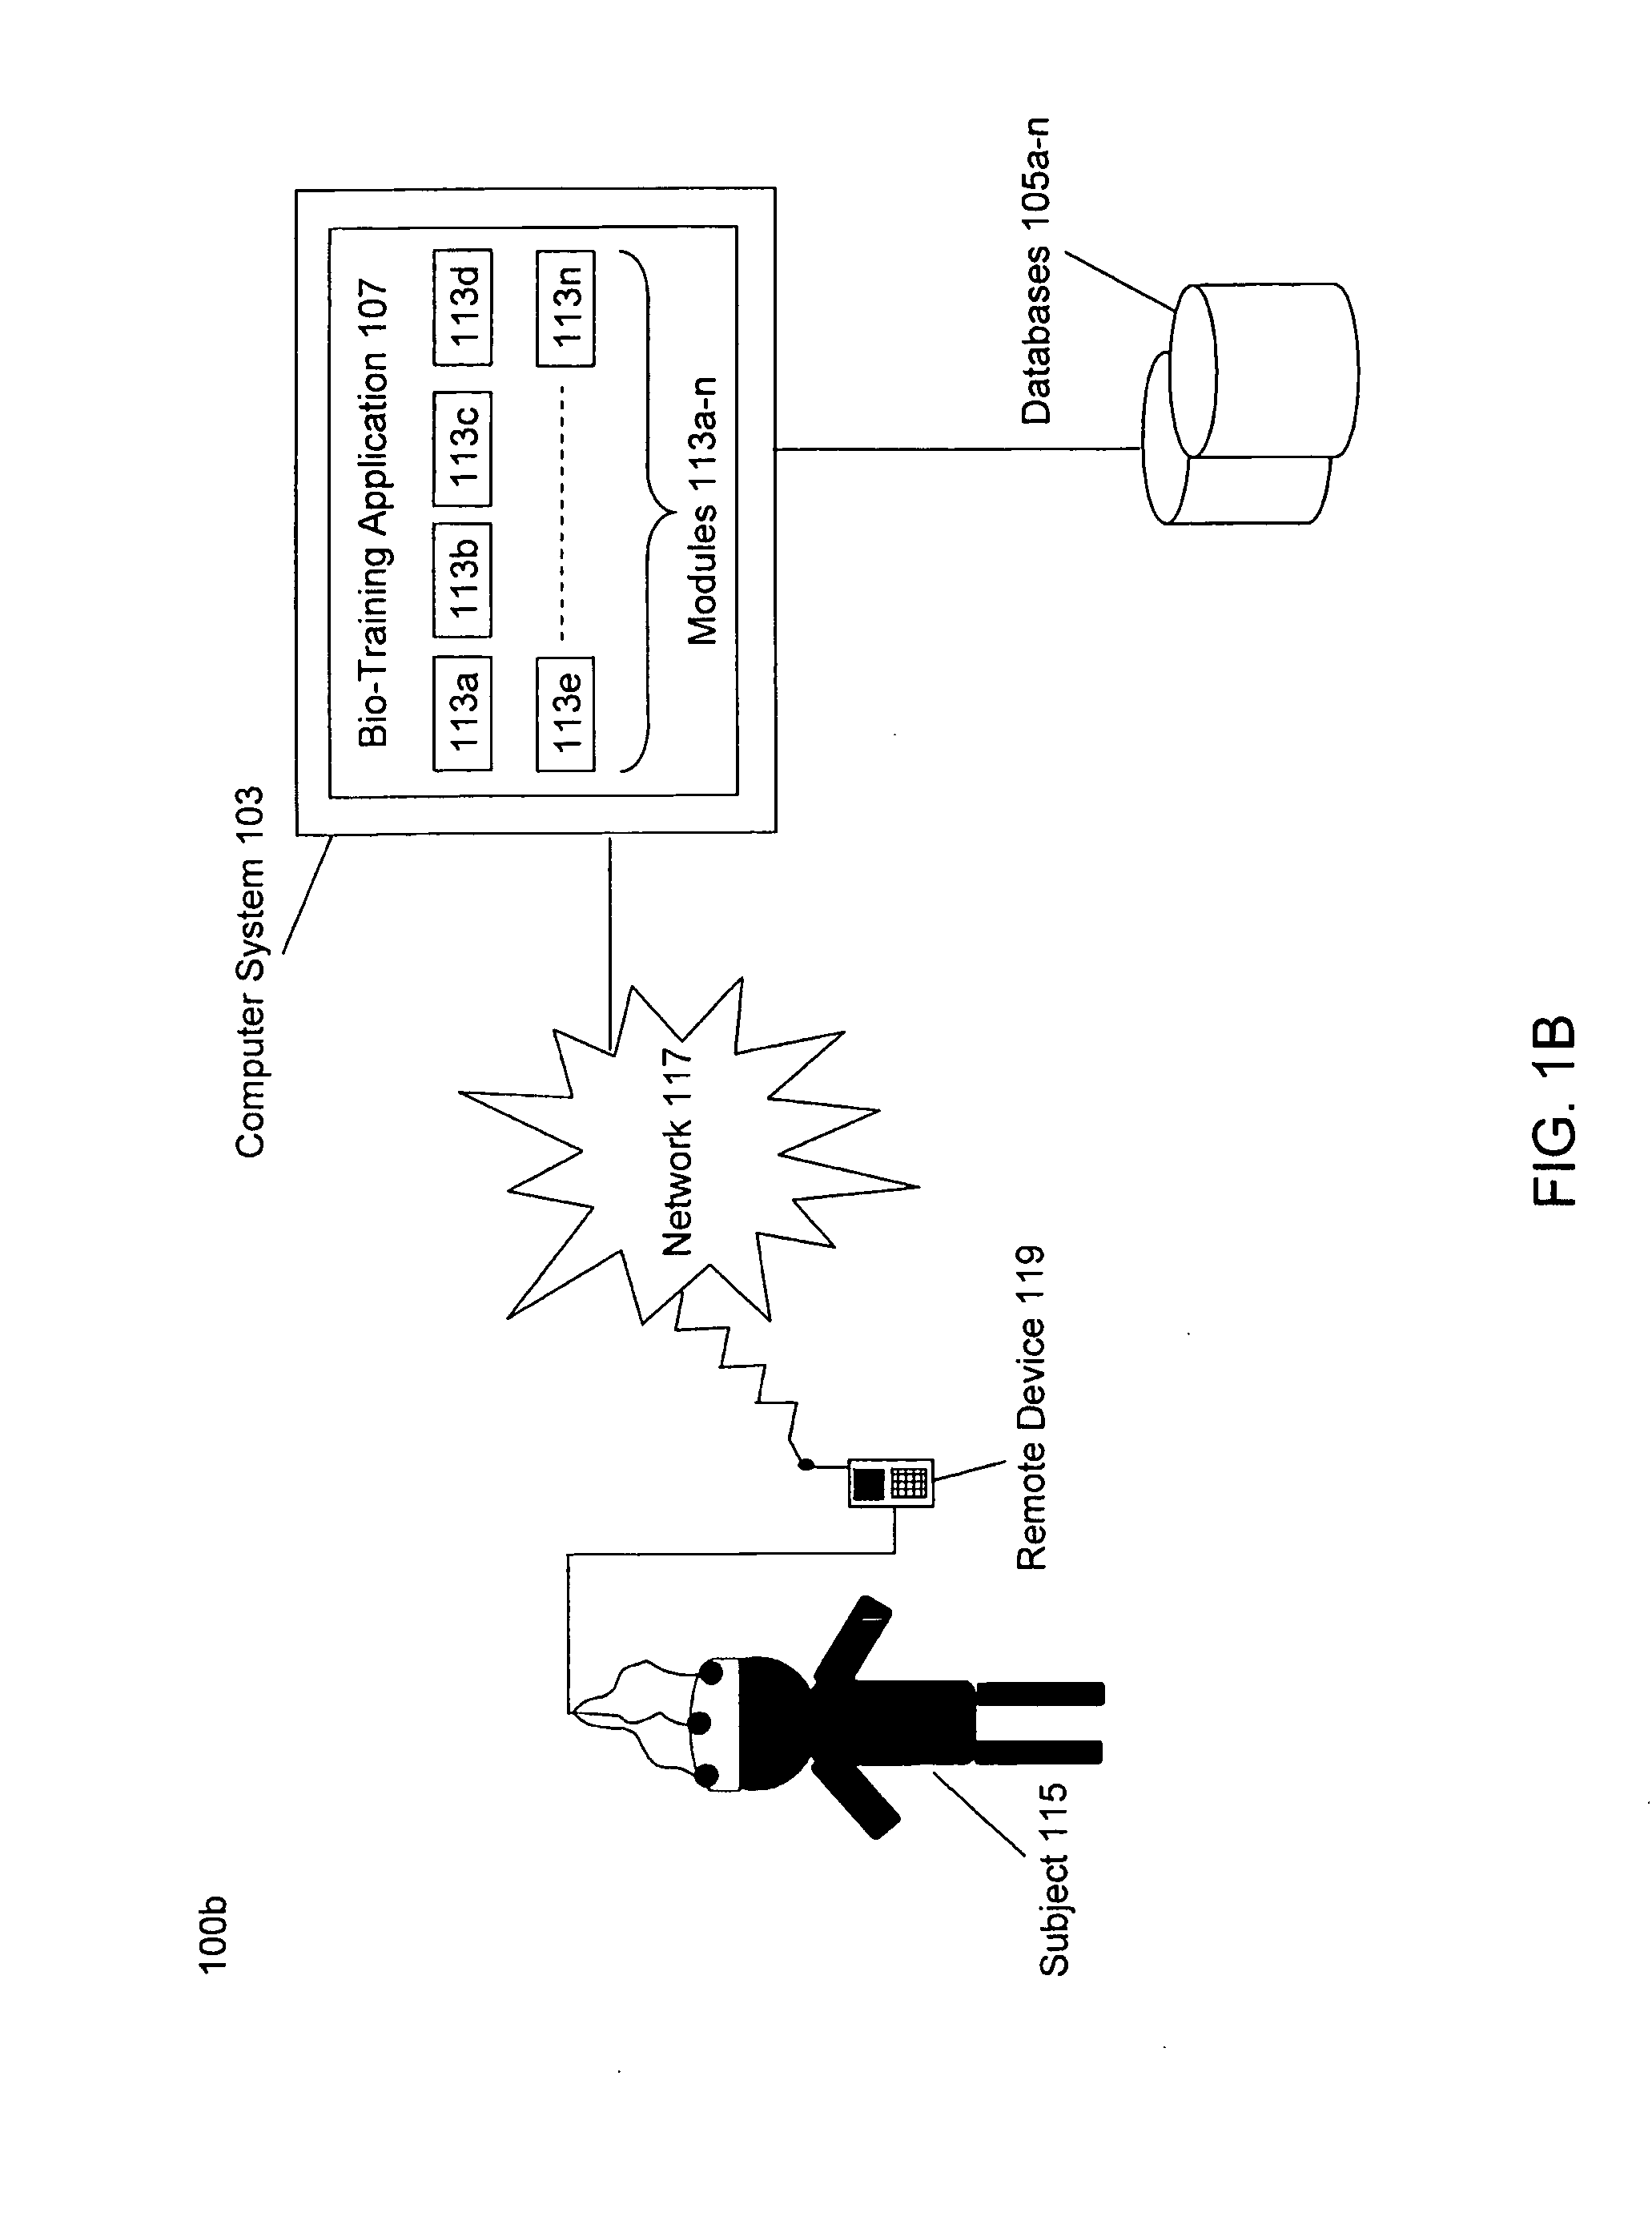 Method, system and apparatus for accessing, modulating, evoking, and entraining global bio-network influences for optimized self-organizing adaptive capacities